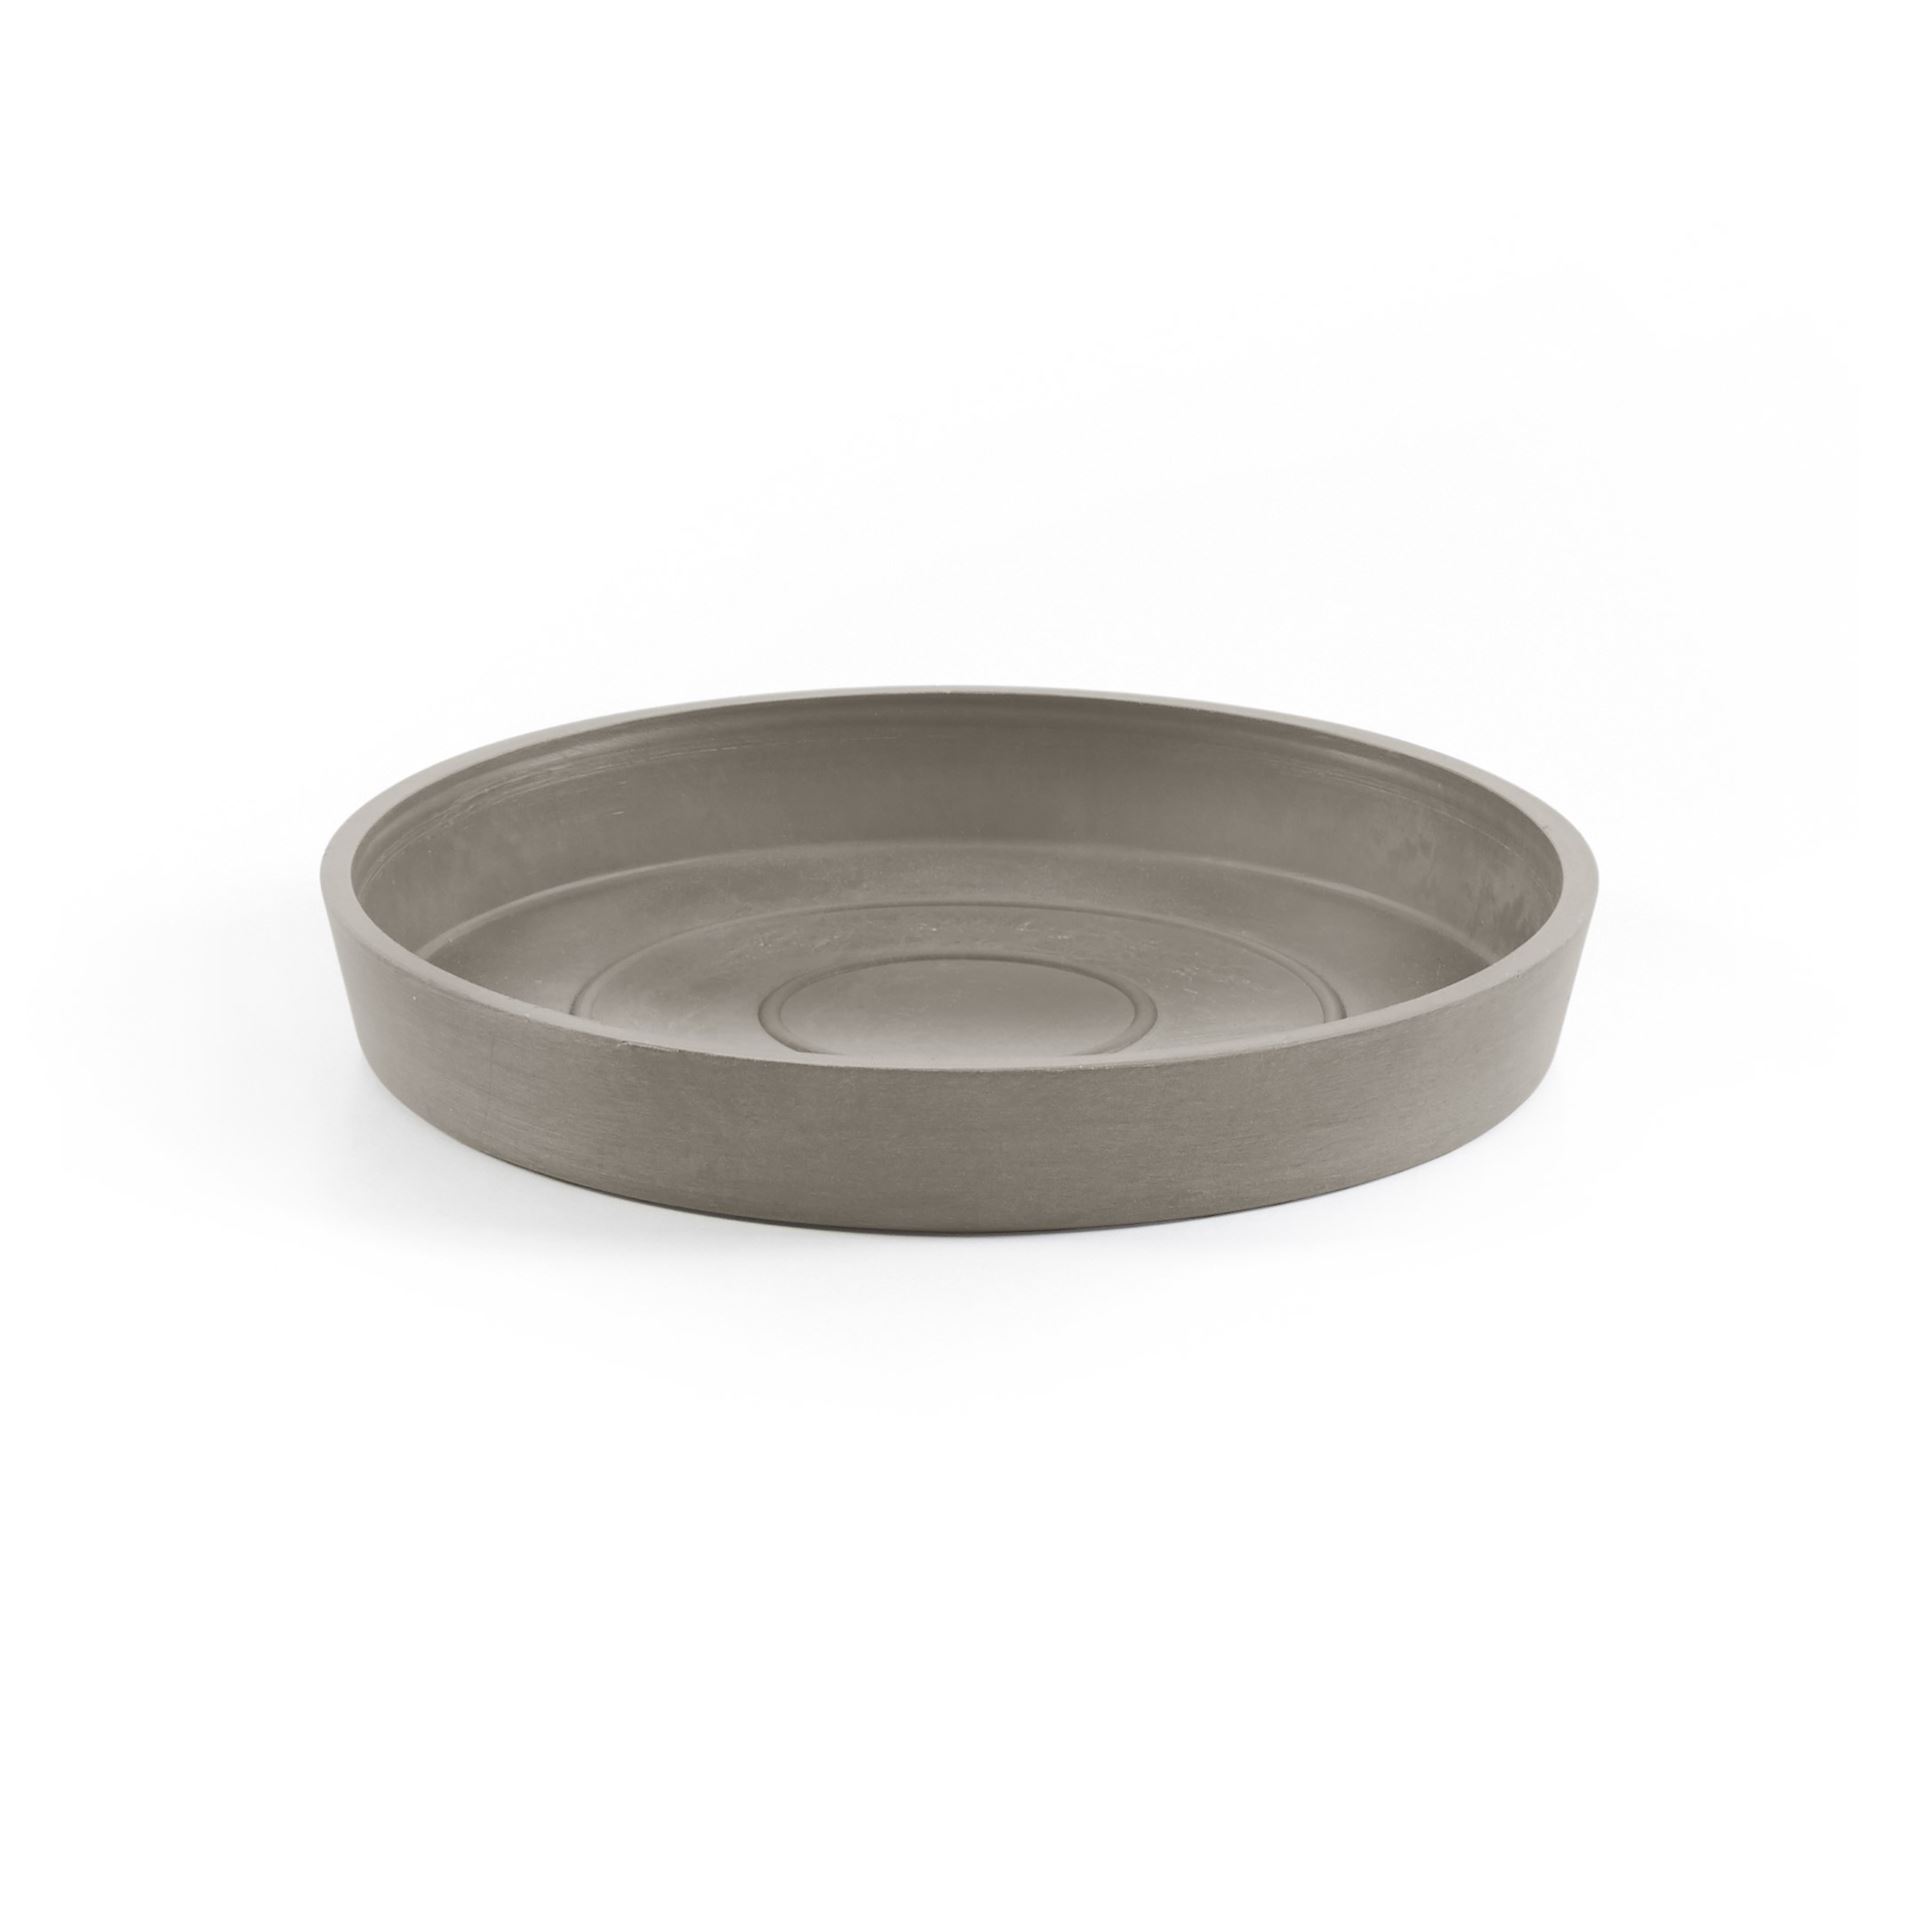 Ecopots Saucer Round - Taupe - Ø18 x H2,5 cm - Round taupe saucer with water reservoir